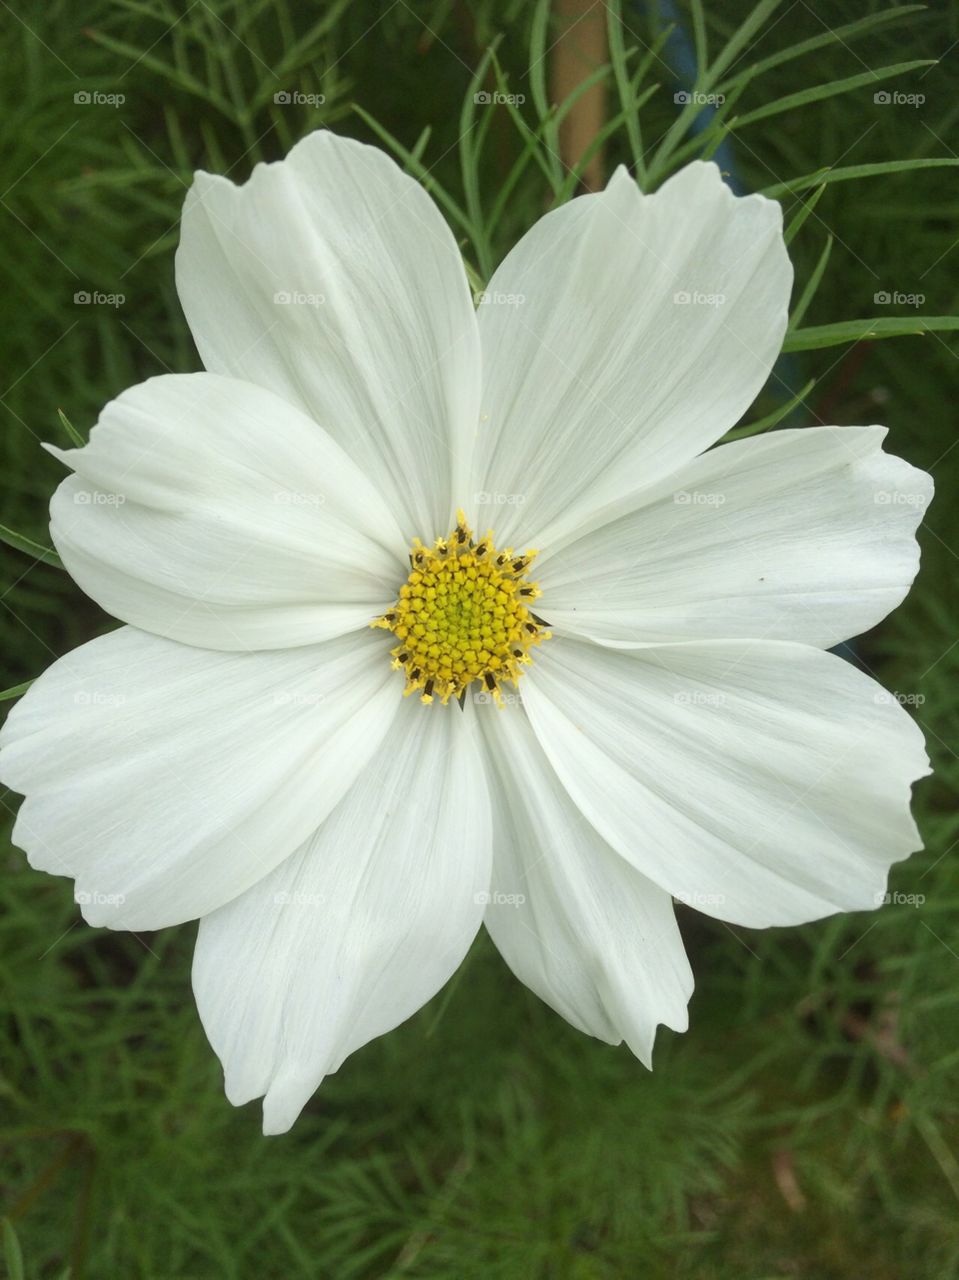 A vivid yet delicate flower for the summer garden. This is cosmos in a shade of white.